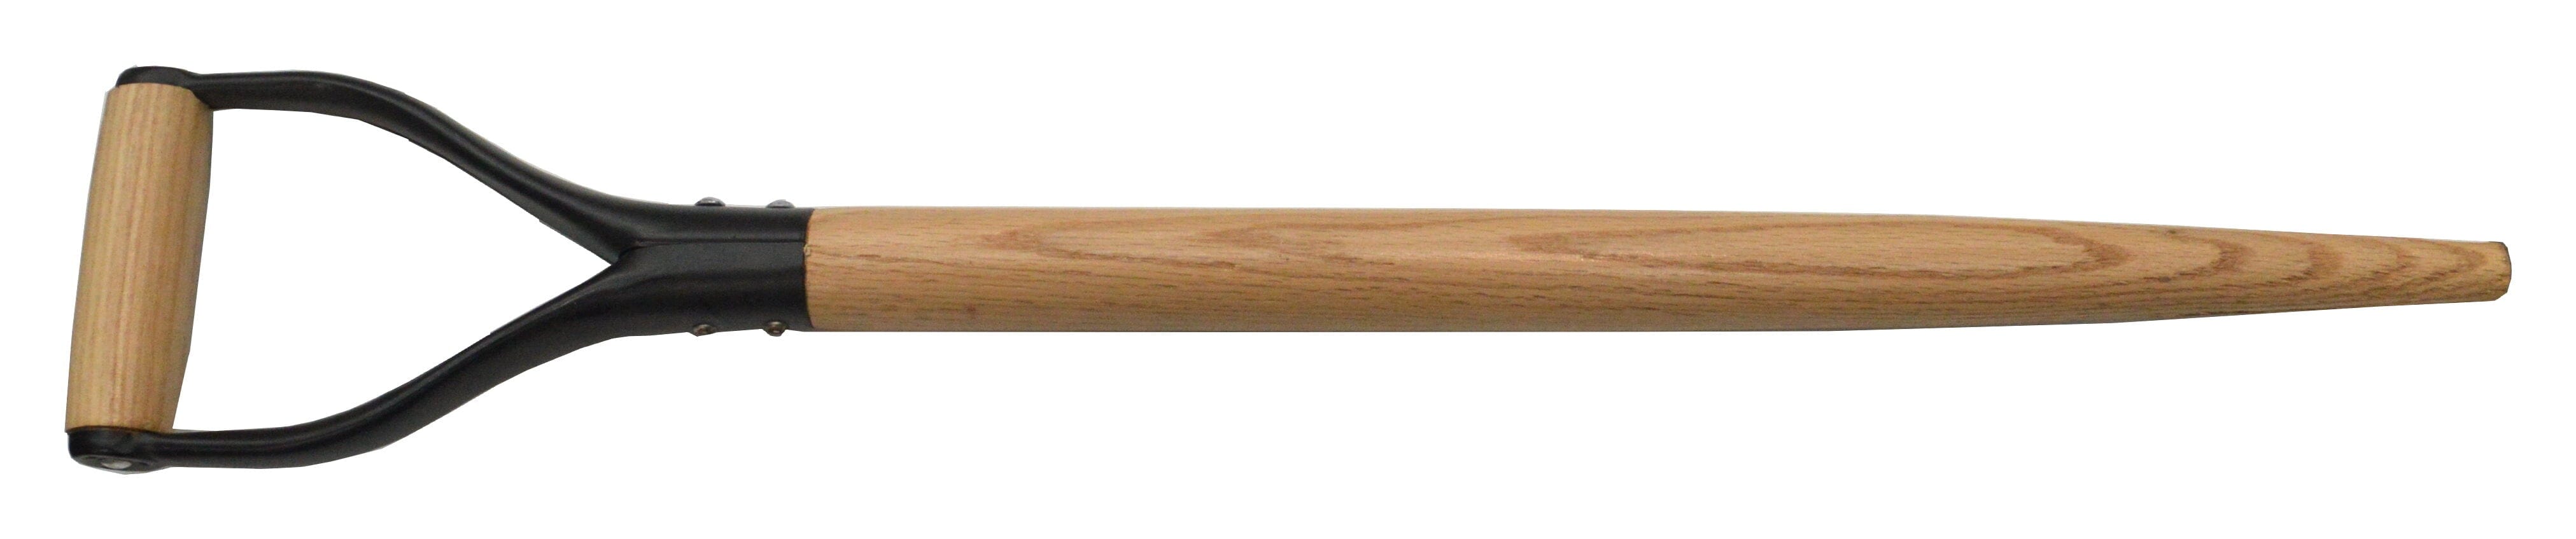 Truper D Shovel Handle - Tapered Ash with Steel Dee